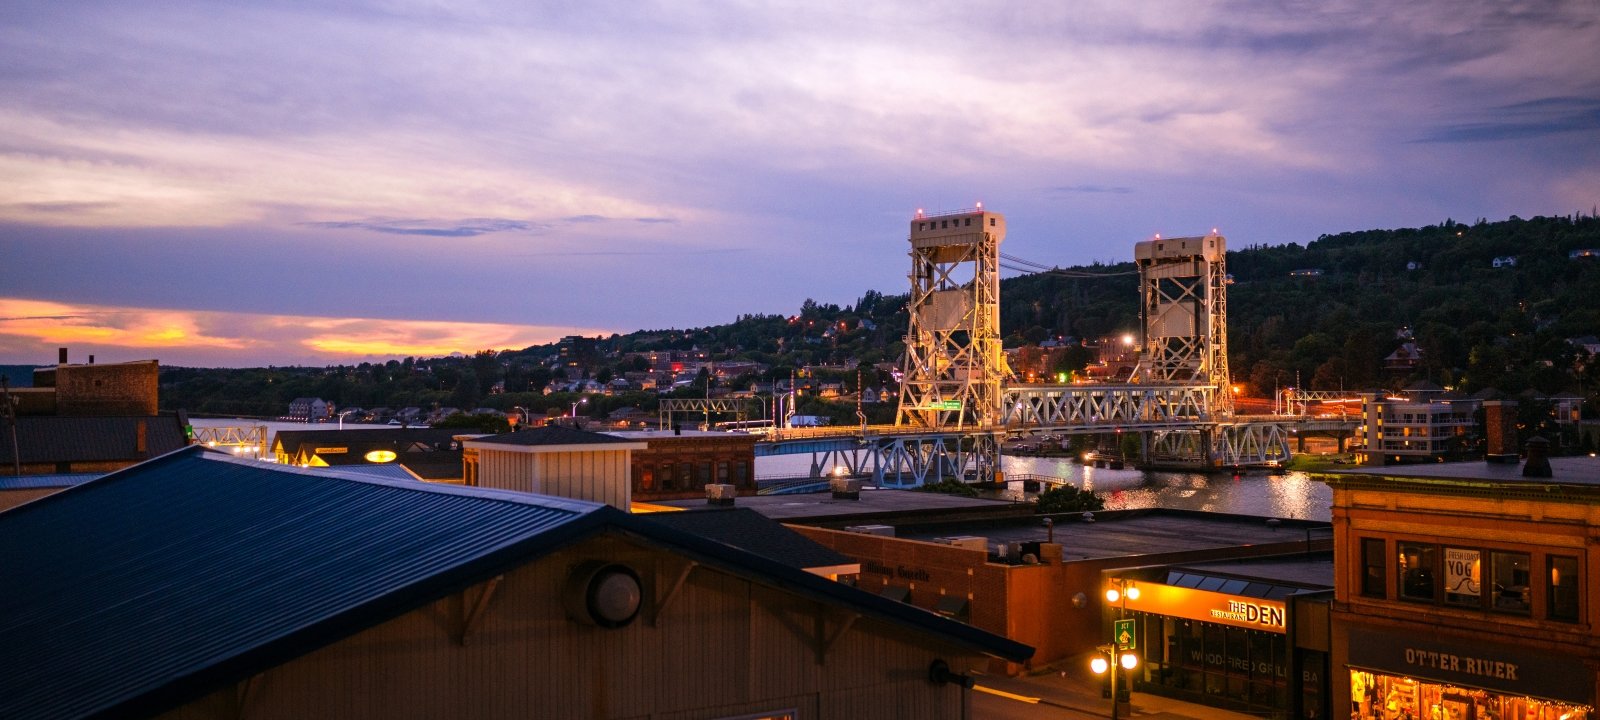 Image of downtown Houghton with the lift bridge in the background